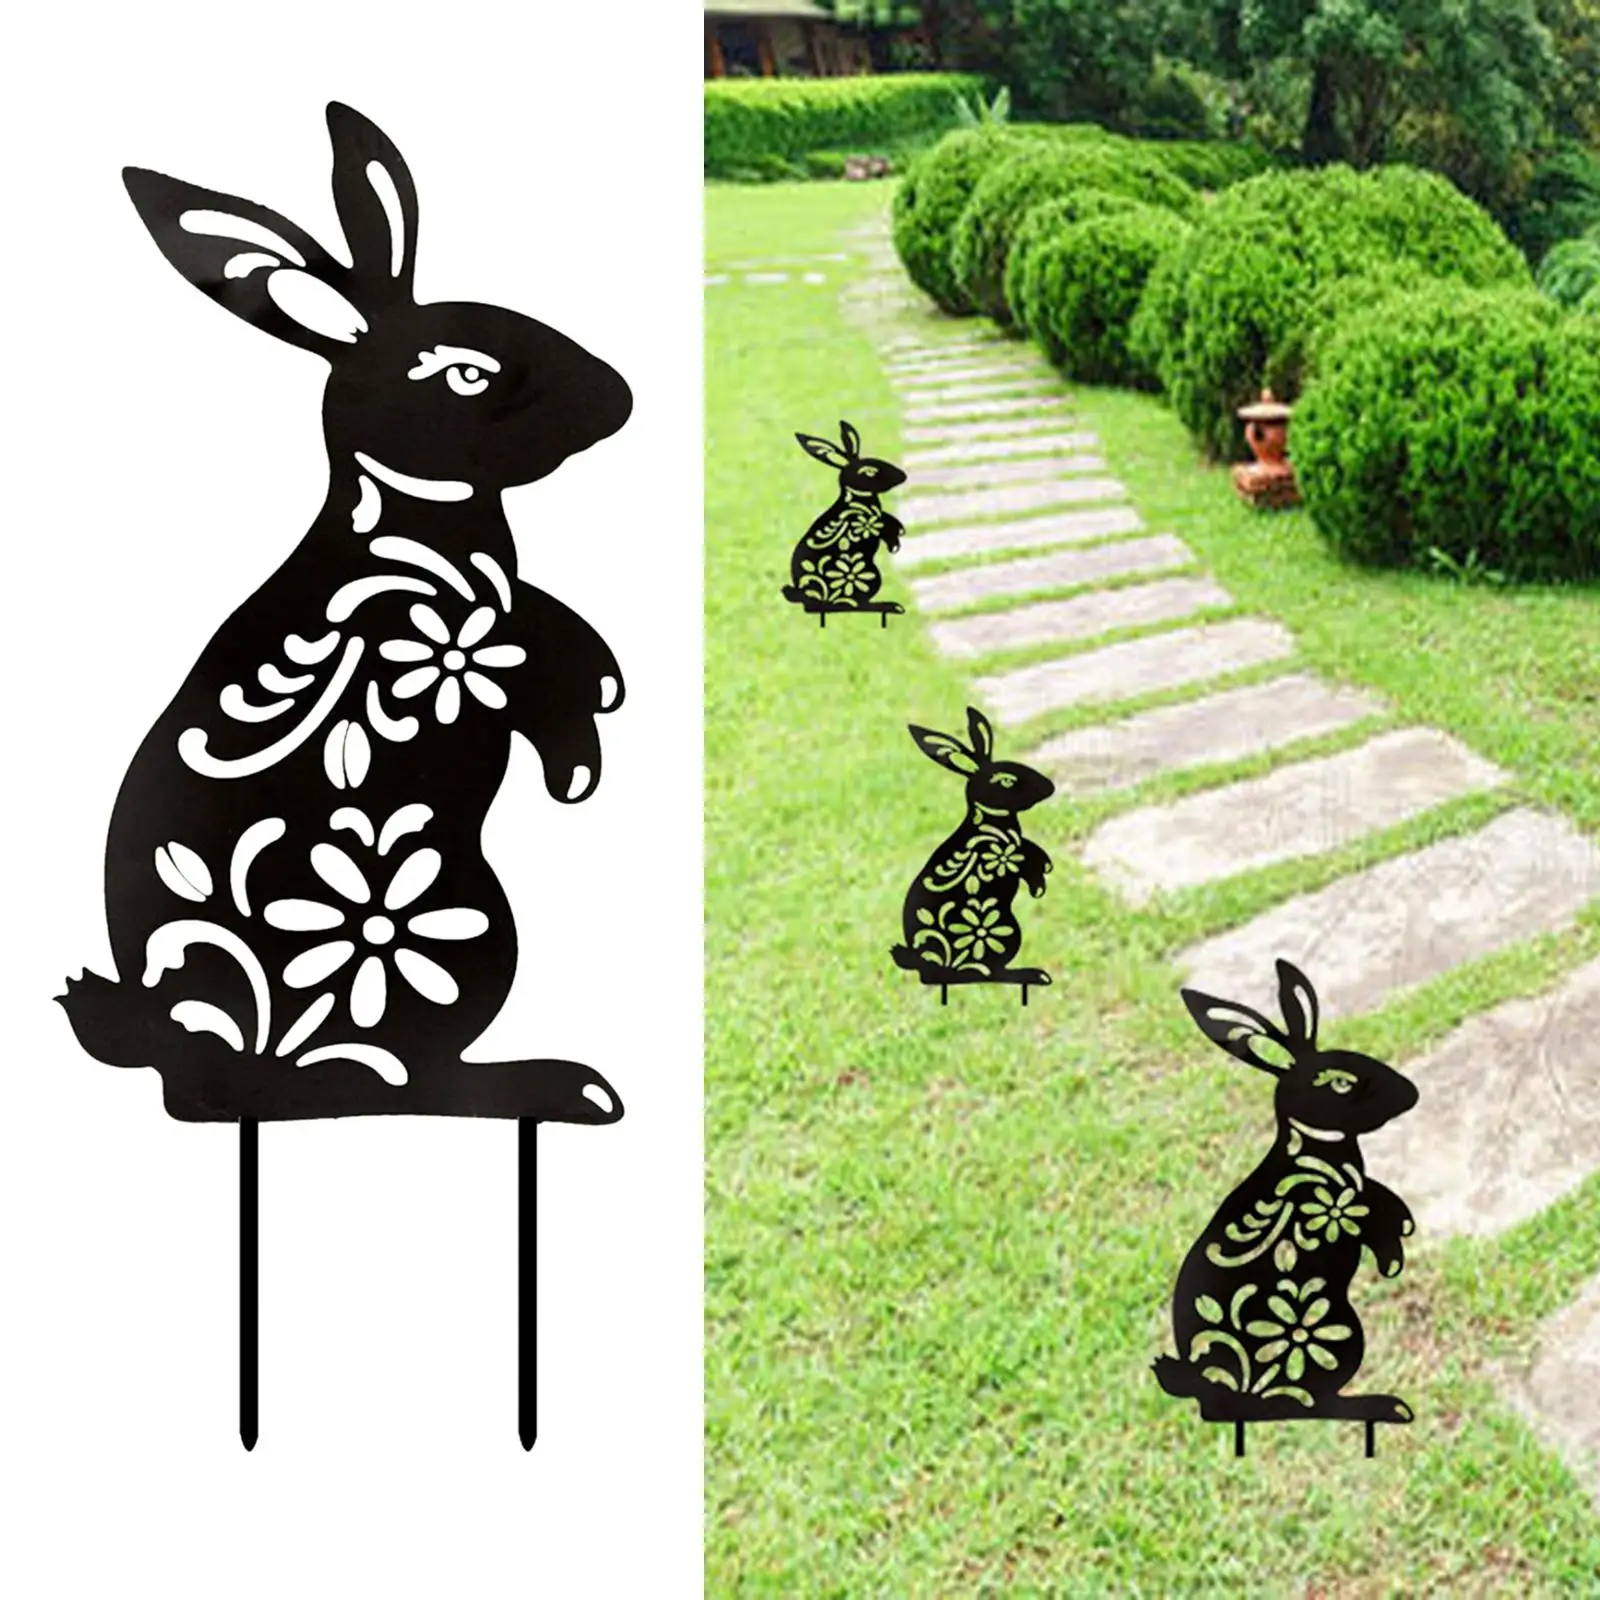 Easter Bunny Silhouette Garden Stake Lawn Ornaments for Yard, Decoration Ornaments